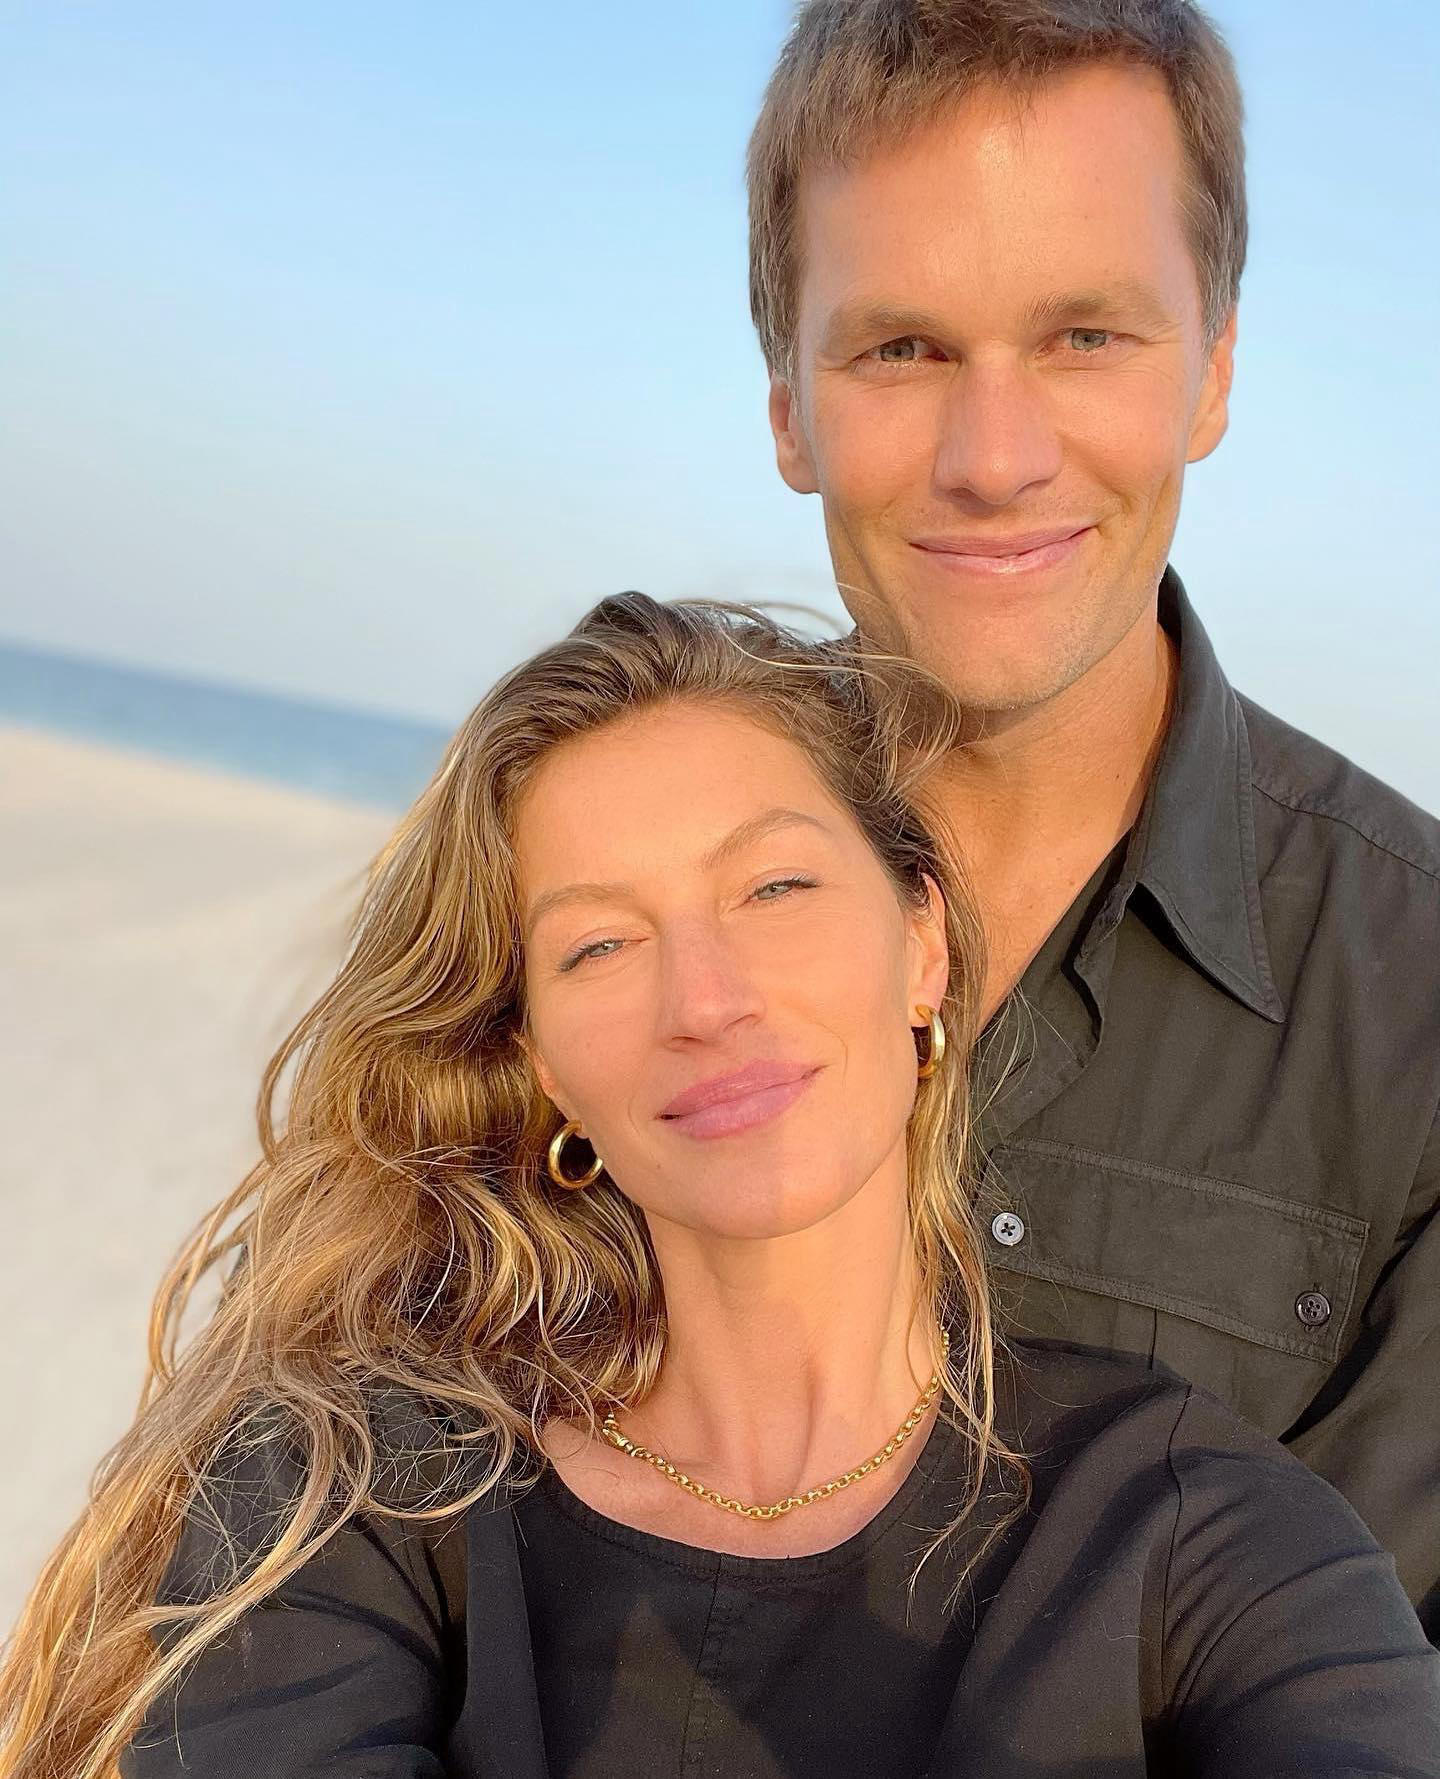 Entertainment Tonight - Looks like there's a flag on the play for Tom Brady and Gisele Bündchen